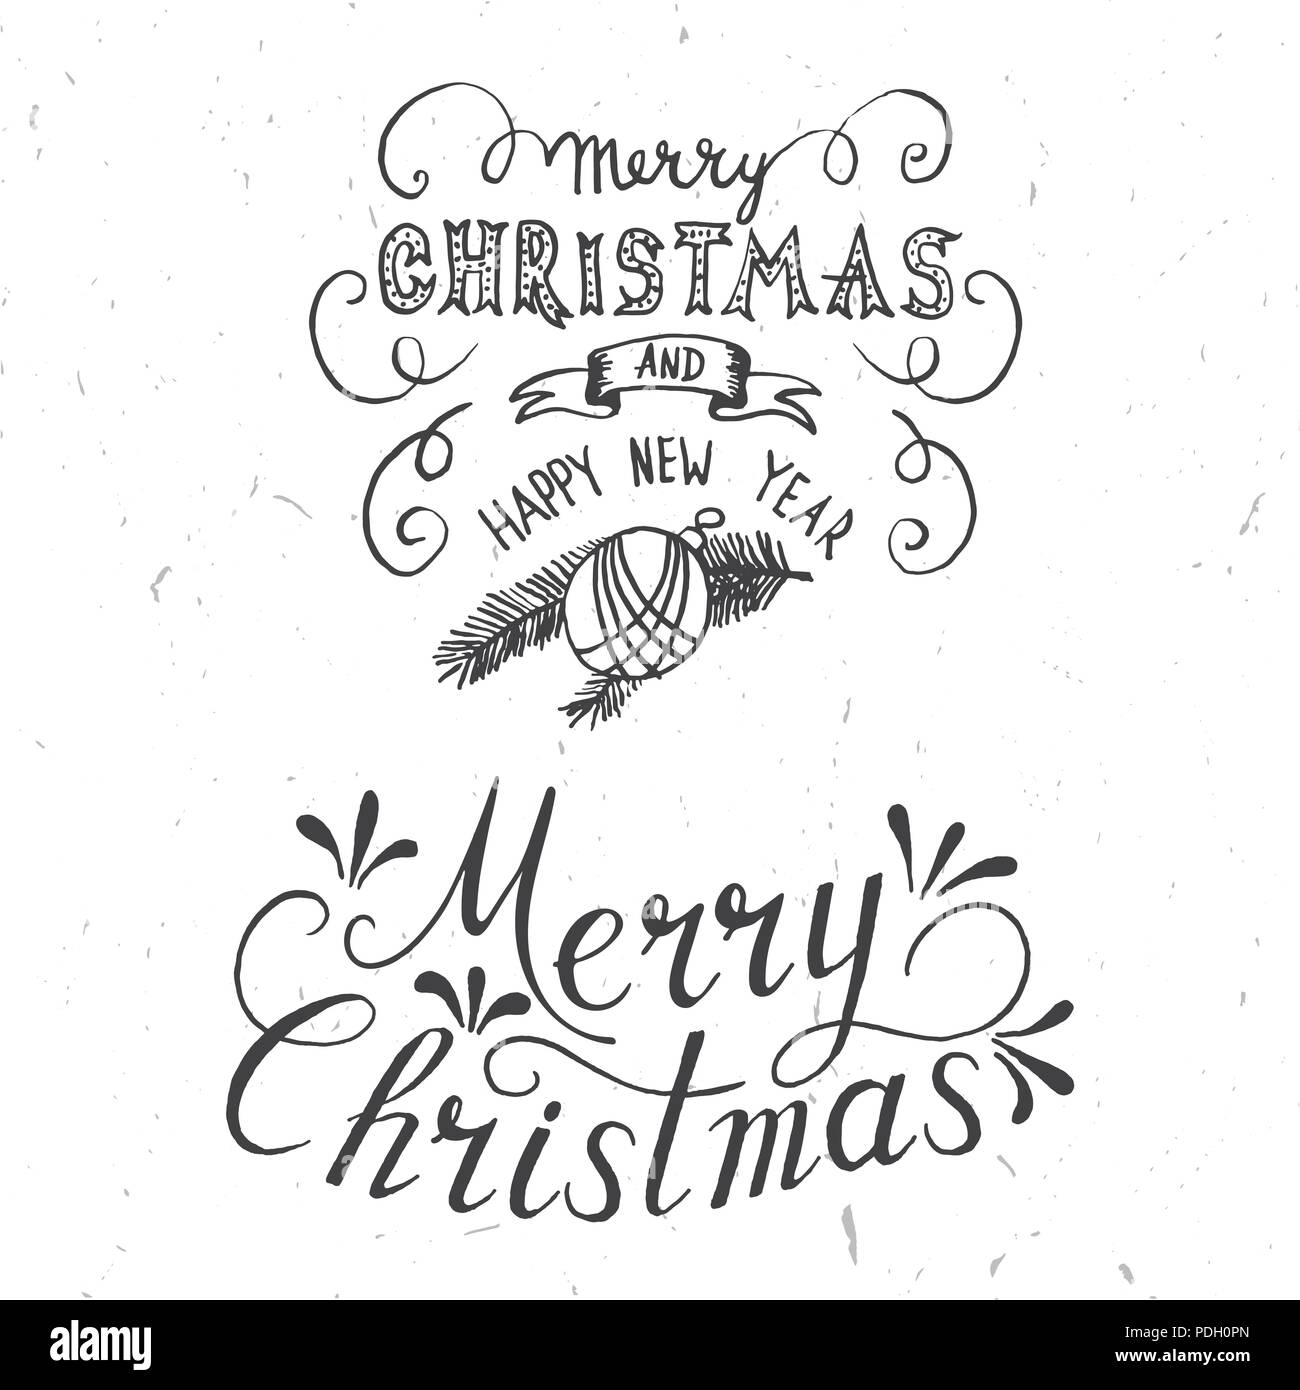 Merry Christmas Lettering Design. Vector illustration. Xmas design for congratulation cards, invitations, banners and flyers. Hand drawn holiday illus Stock Vector